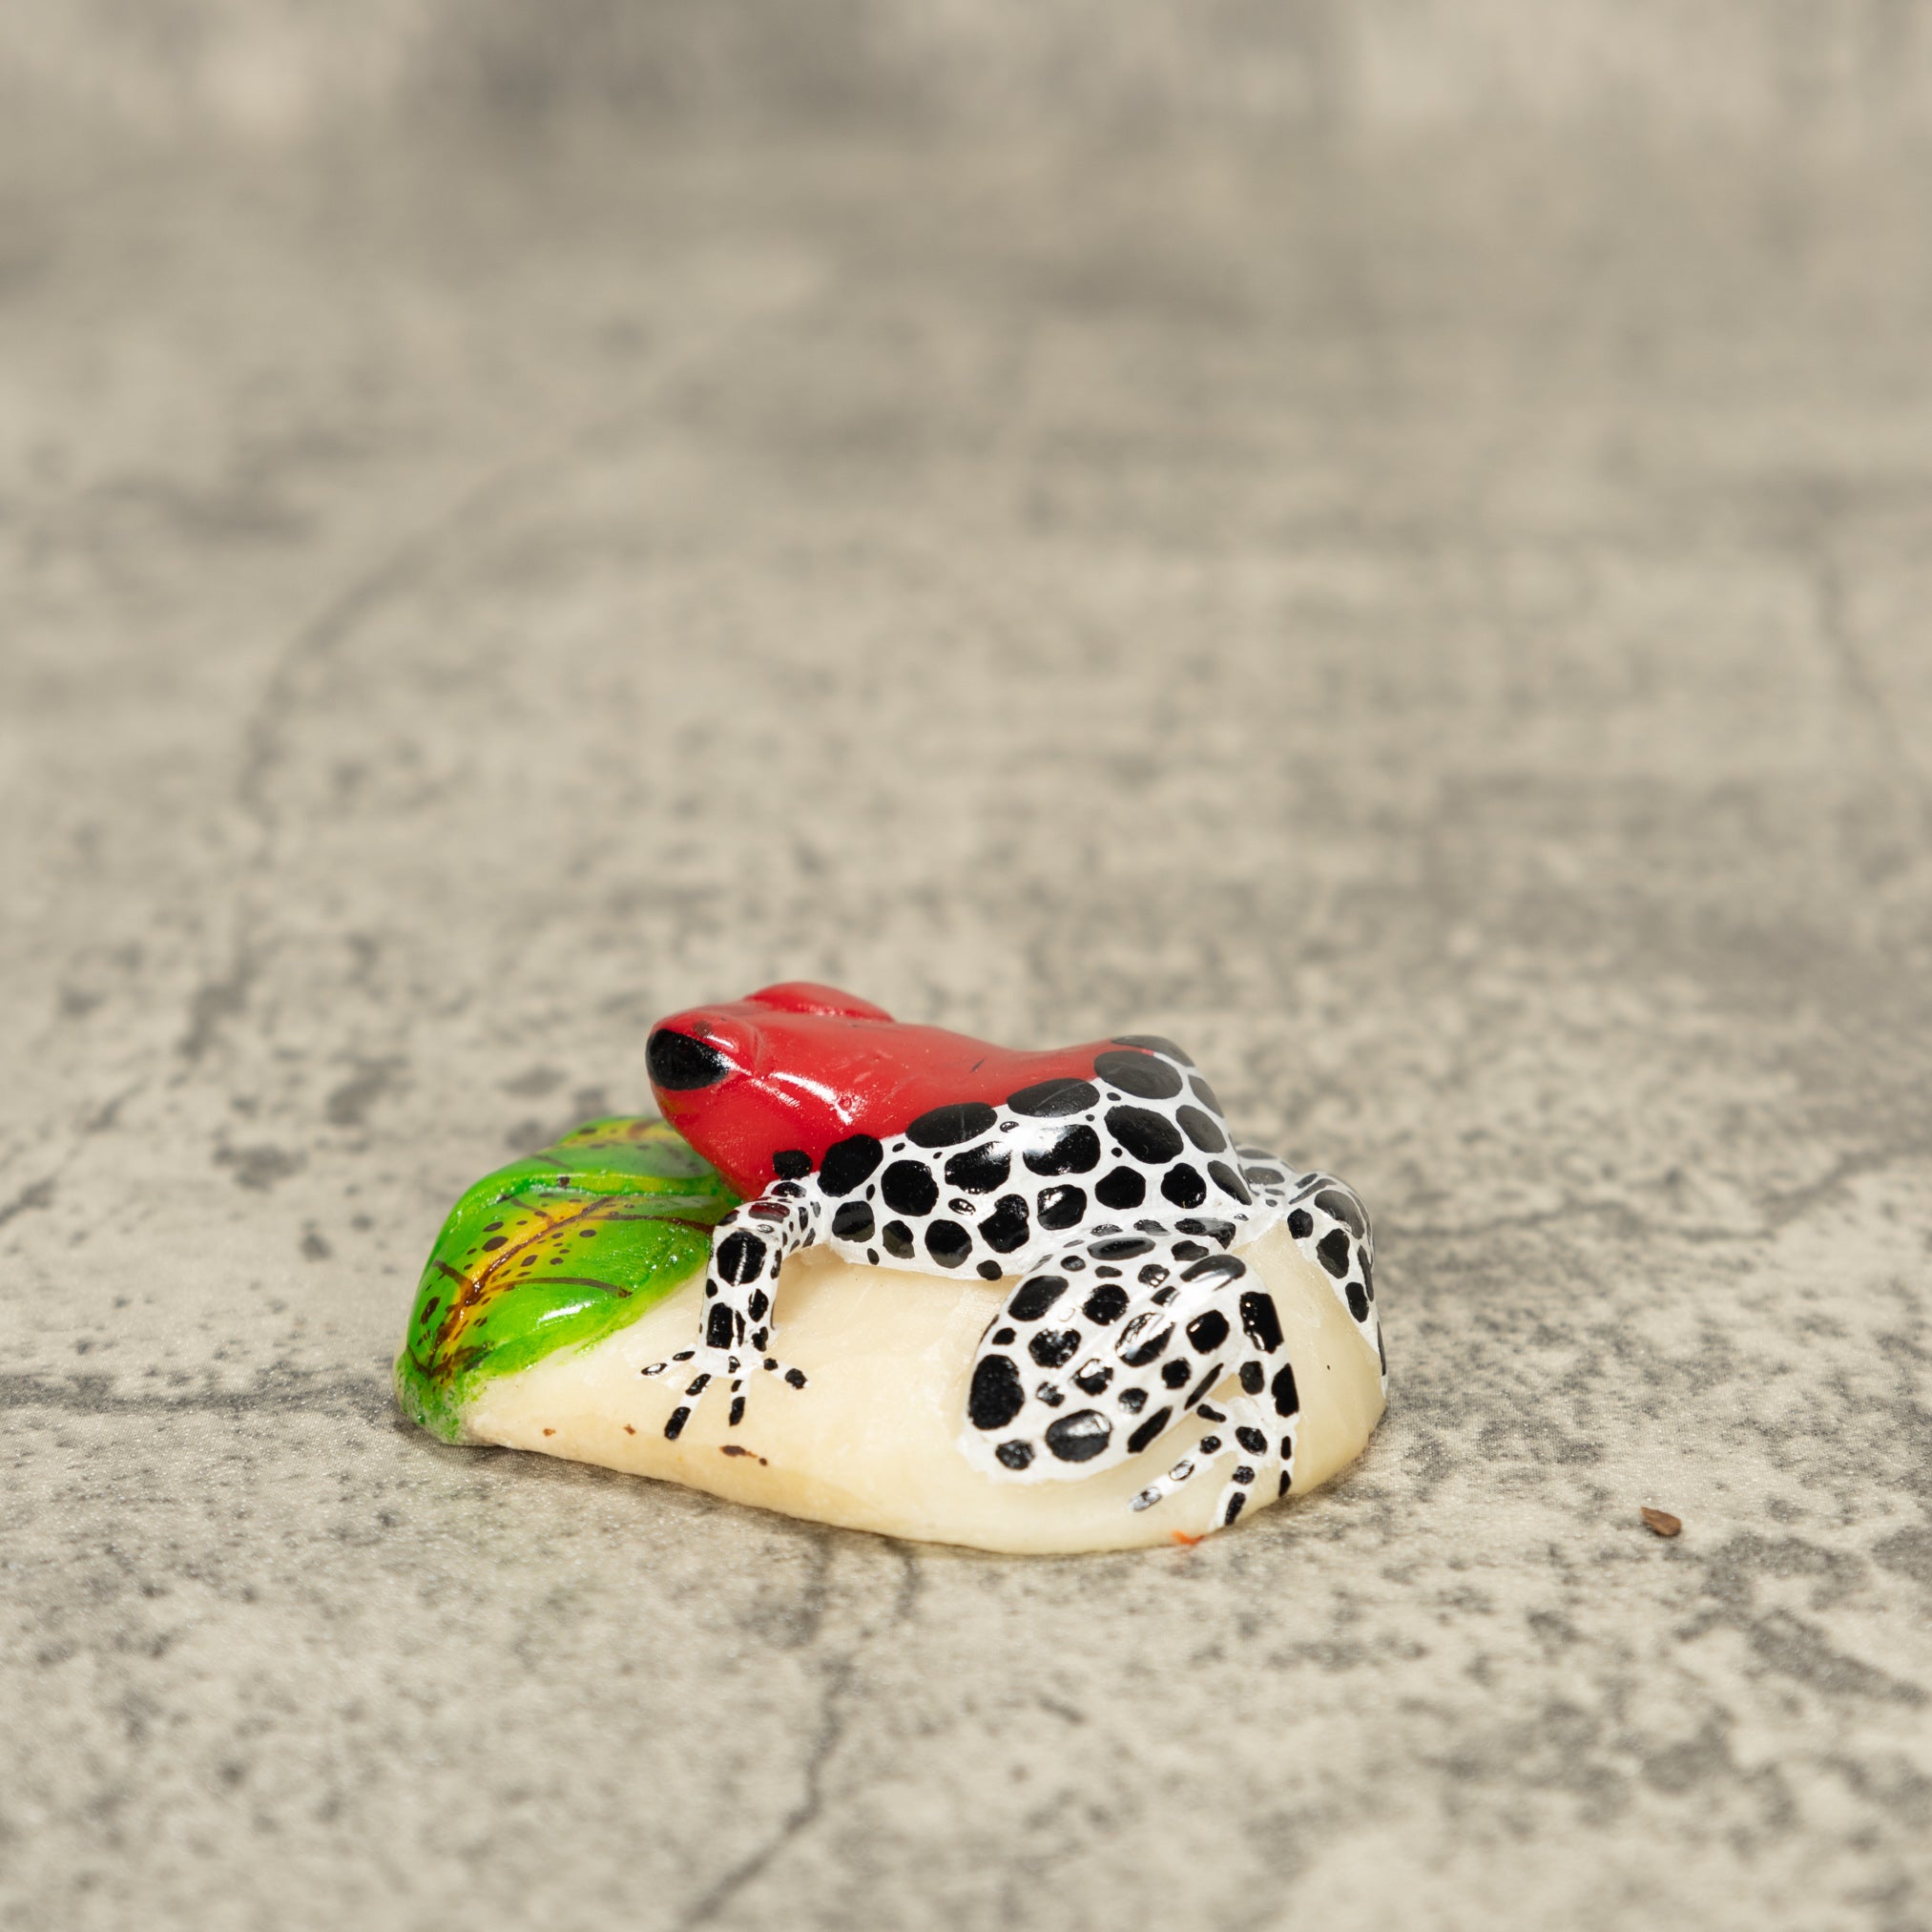 Red Black And White Poison Dart Frog Tagua Nut Carving